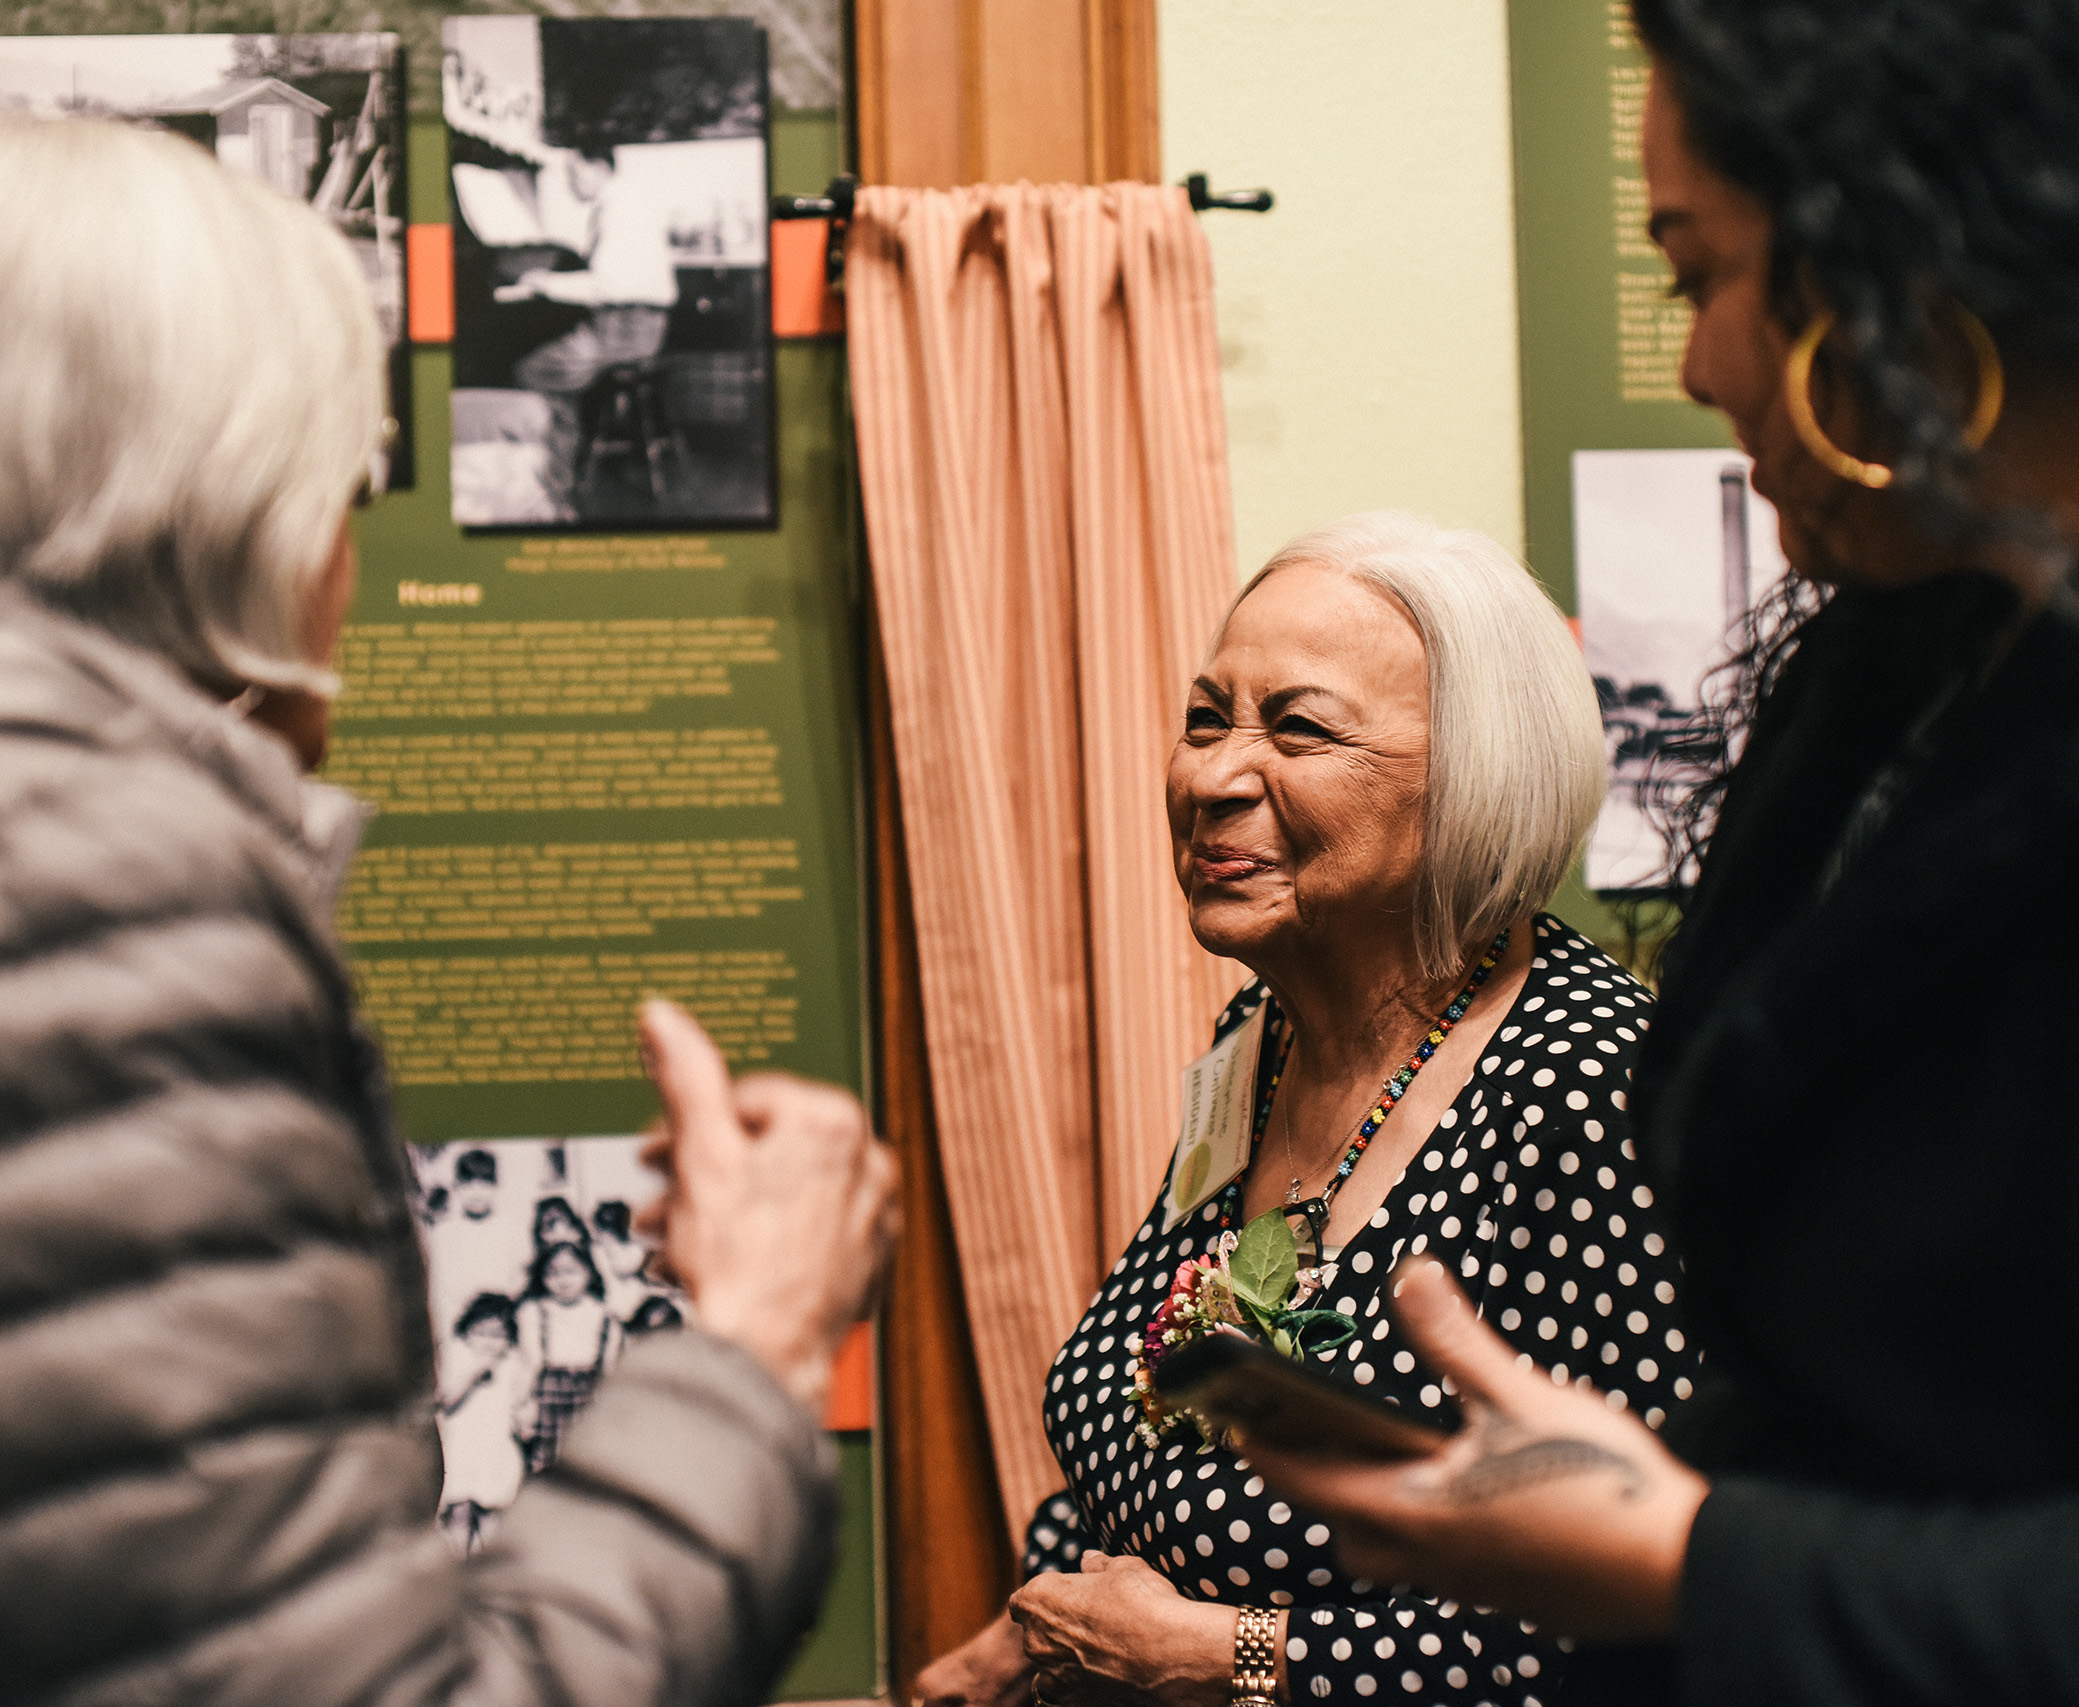 Three women are talking in the Conejos exhibit at the Colorado Springs Pioneers Museum